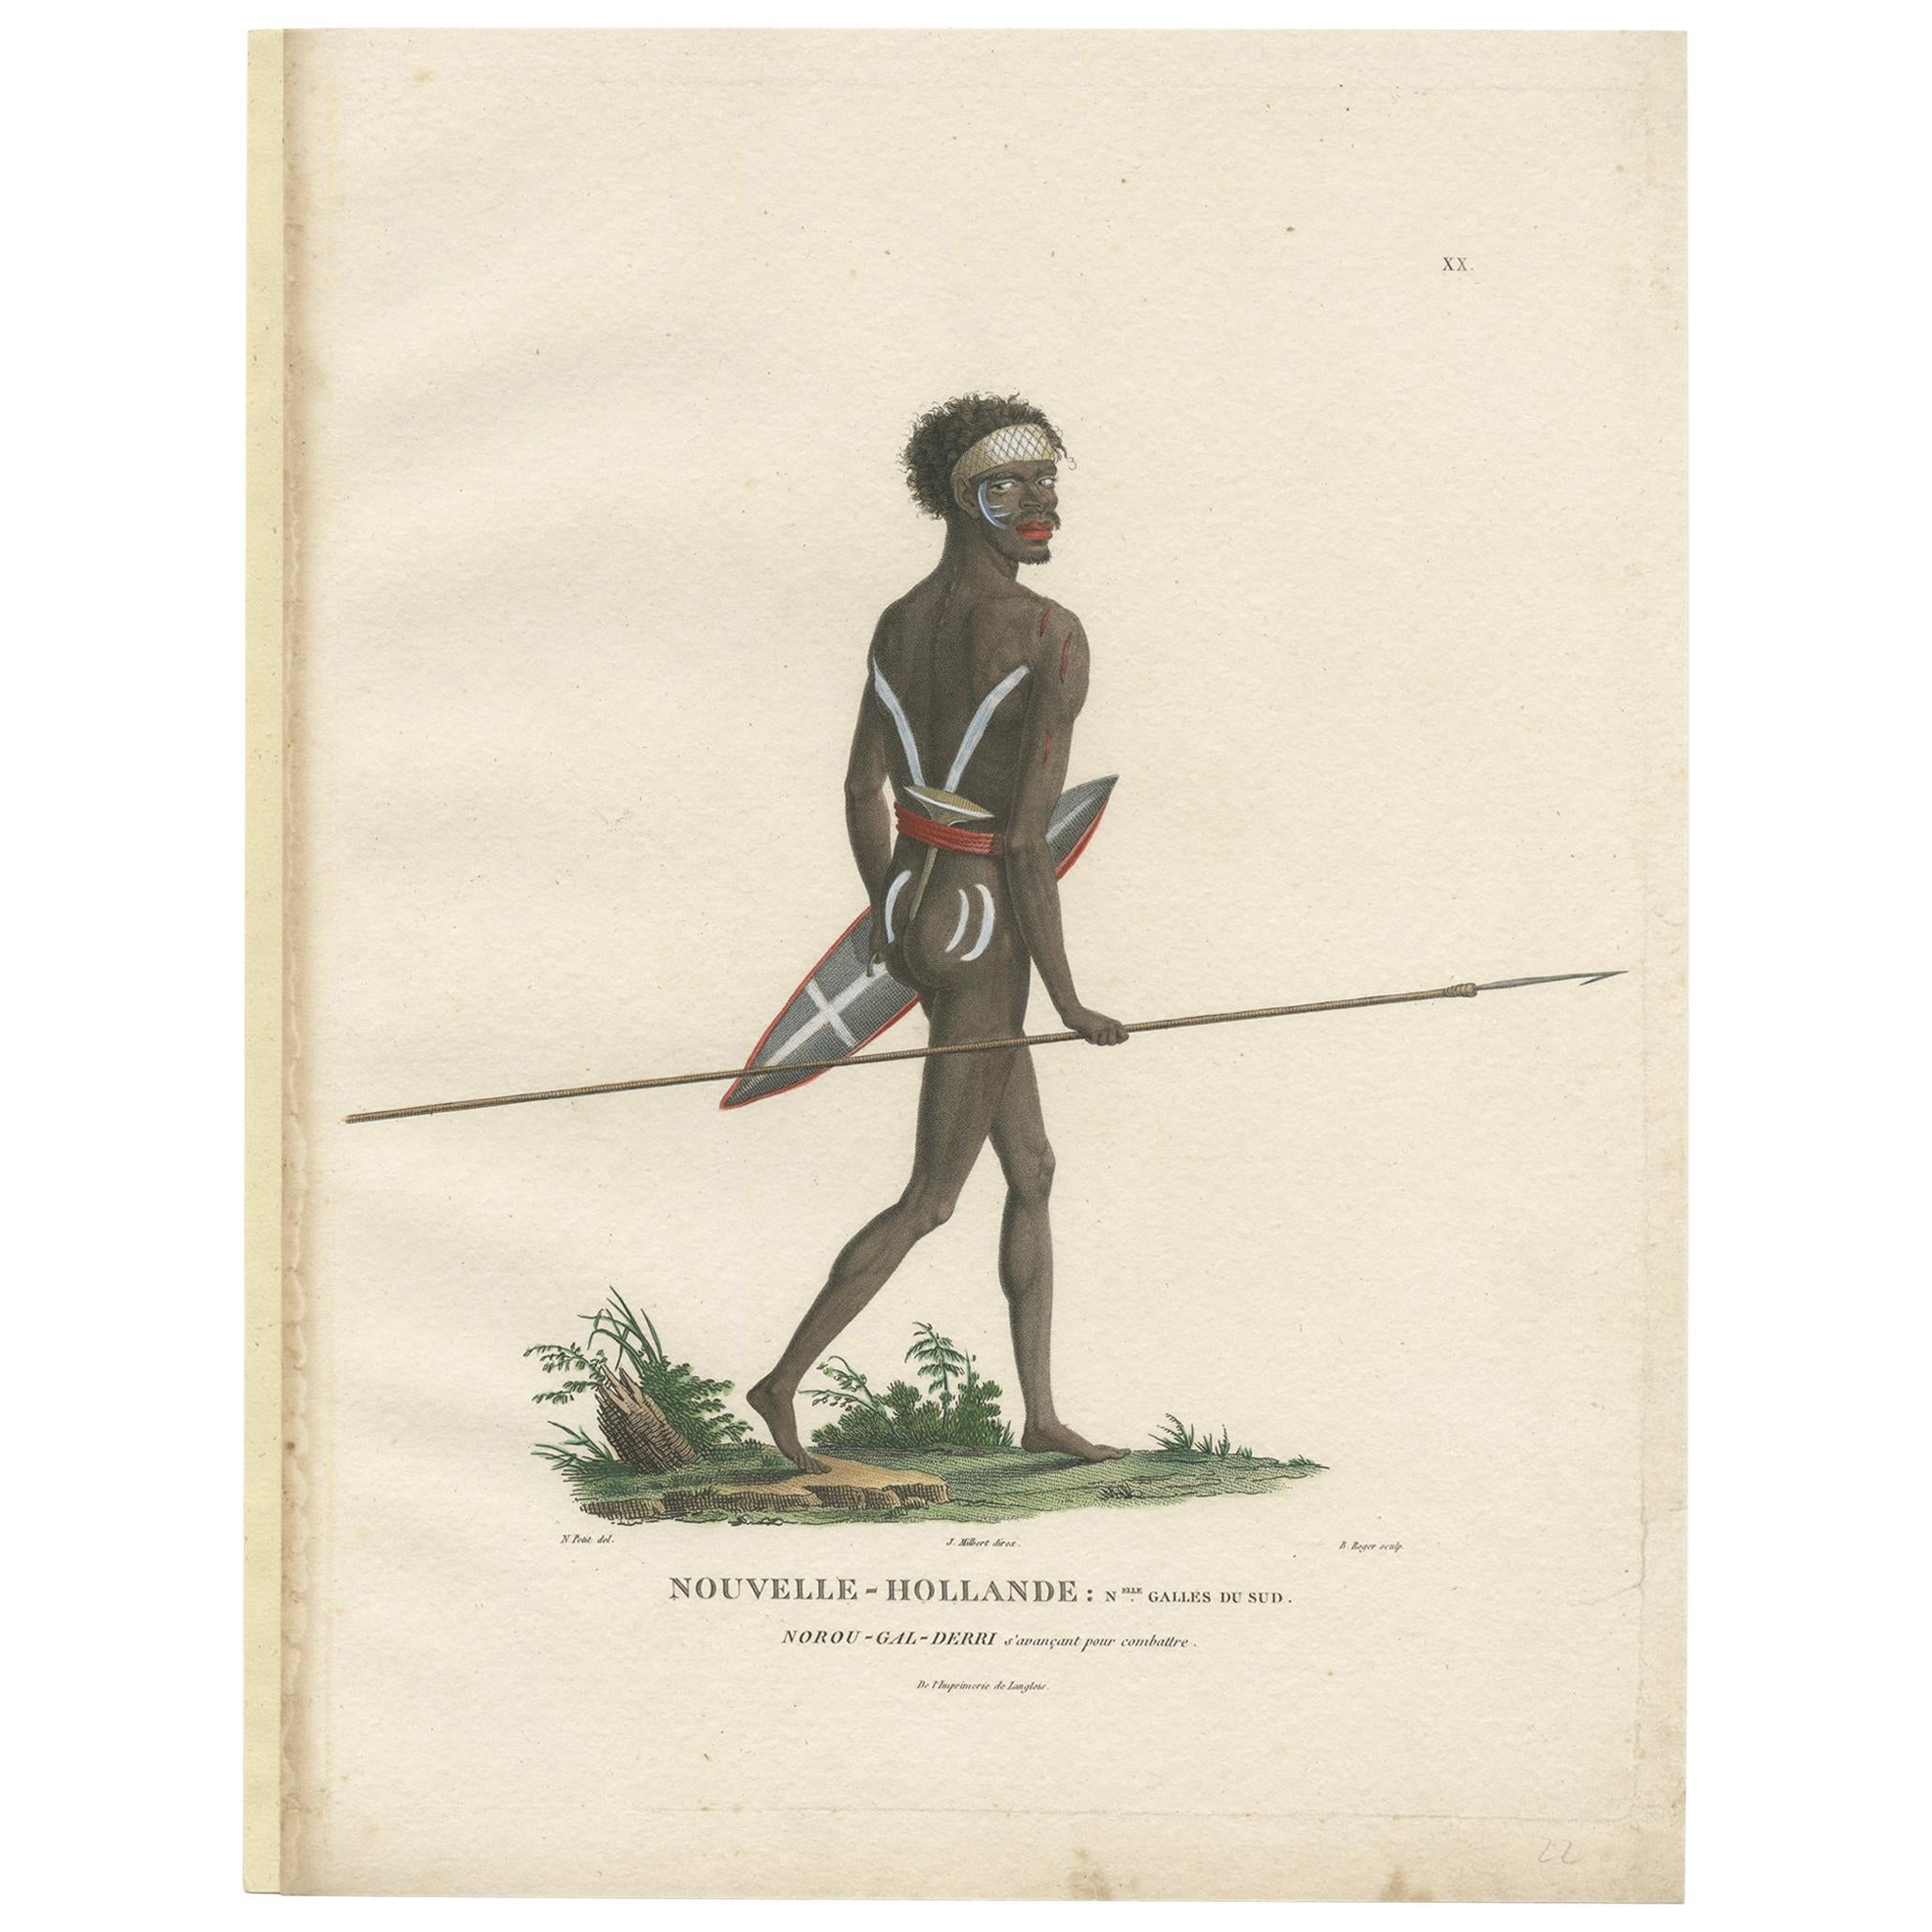 Antique Hand-Colored Print of an Indigenous Australian Man by Peron 'circa 1810' For Sale